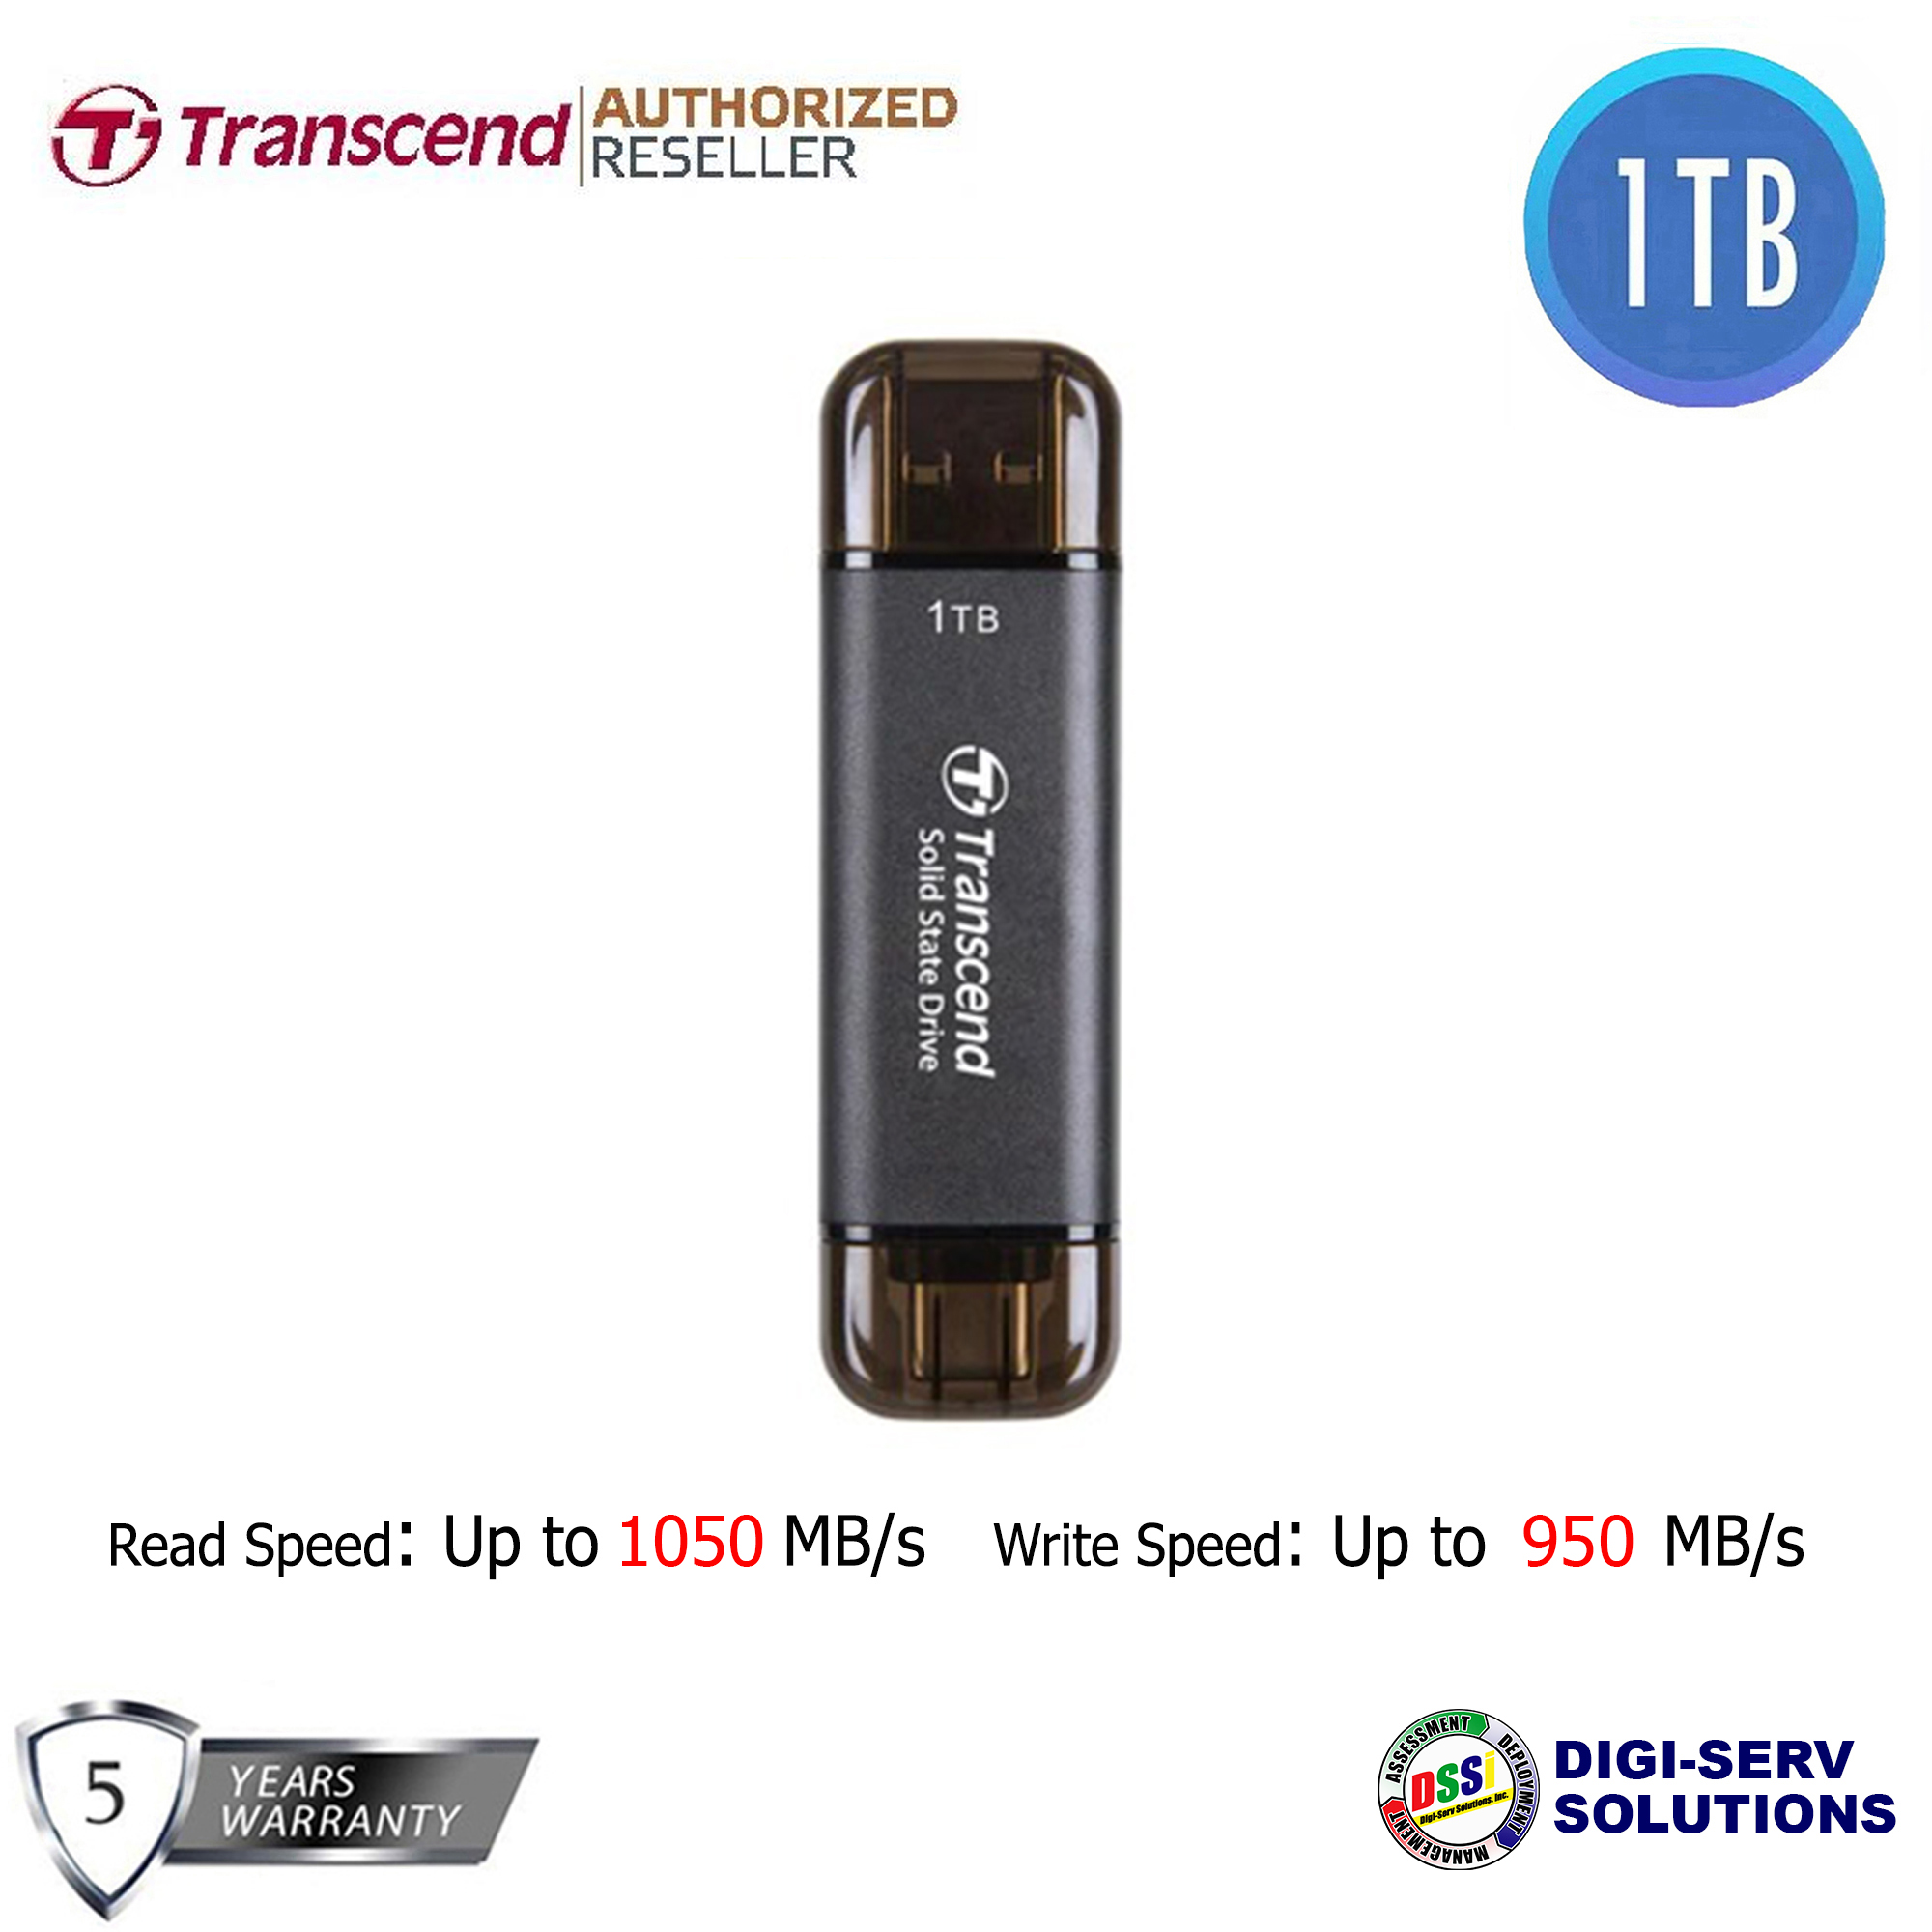 256GB Transcend ESD310C Dual USB Portable SSD (USB Type-A and Type